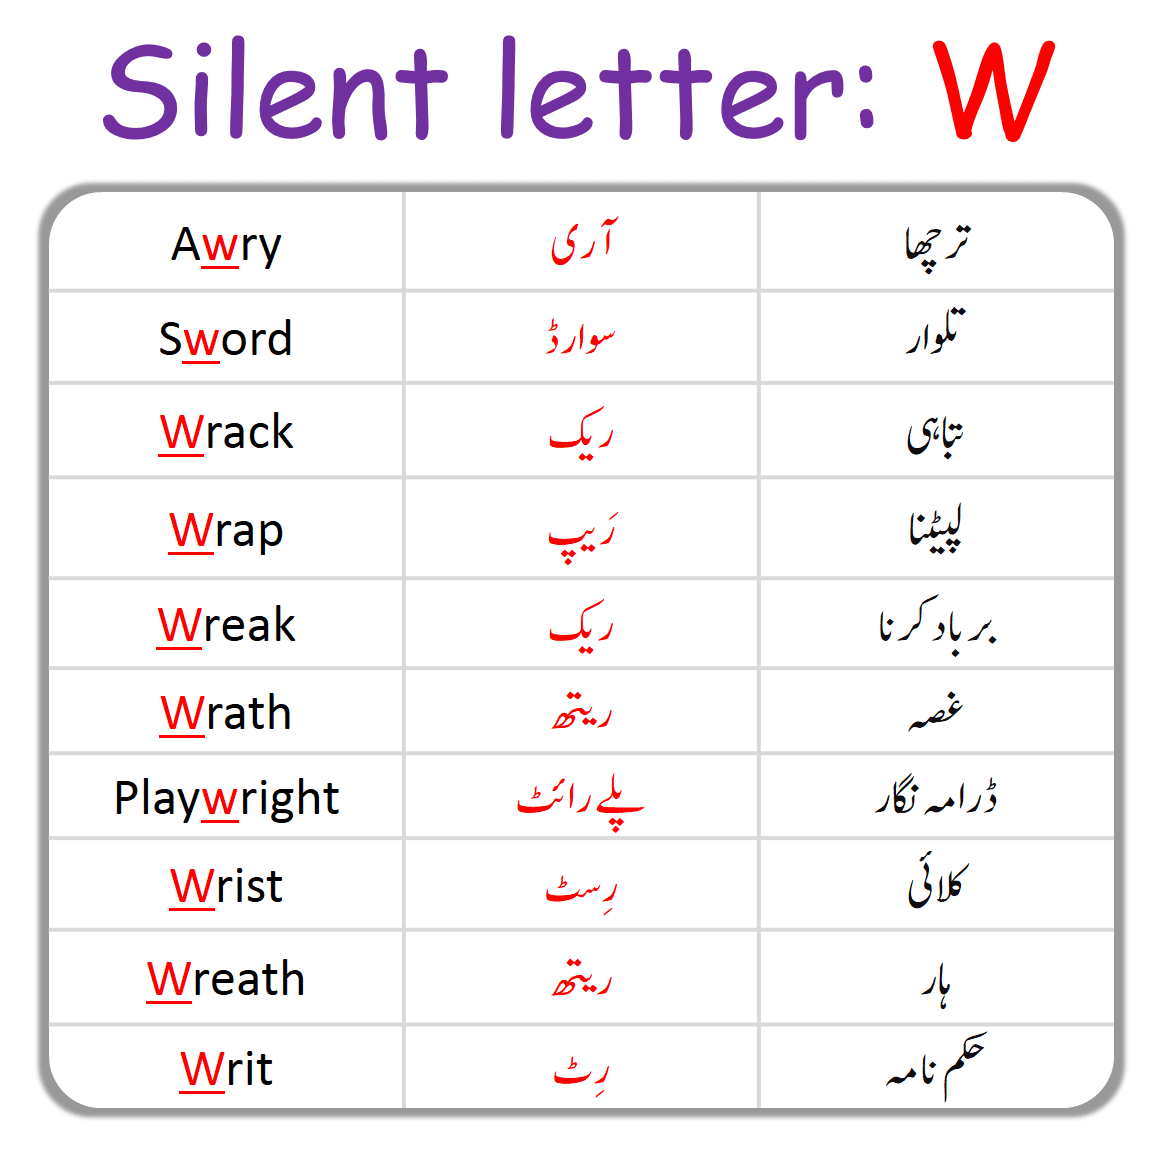 W Silent Letter in English with Urdu Examples